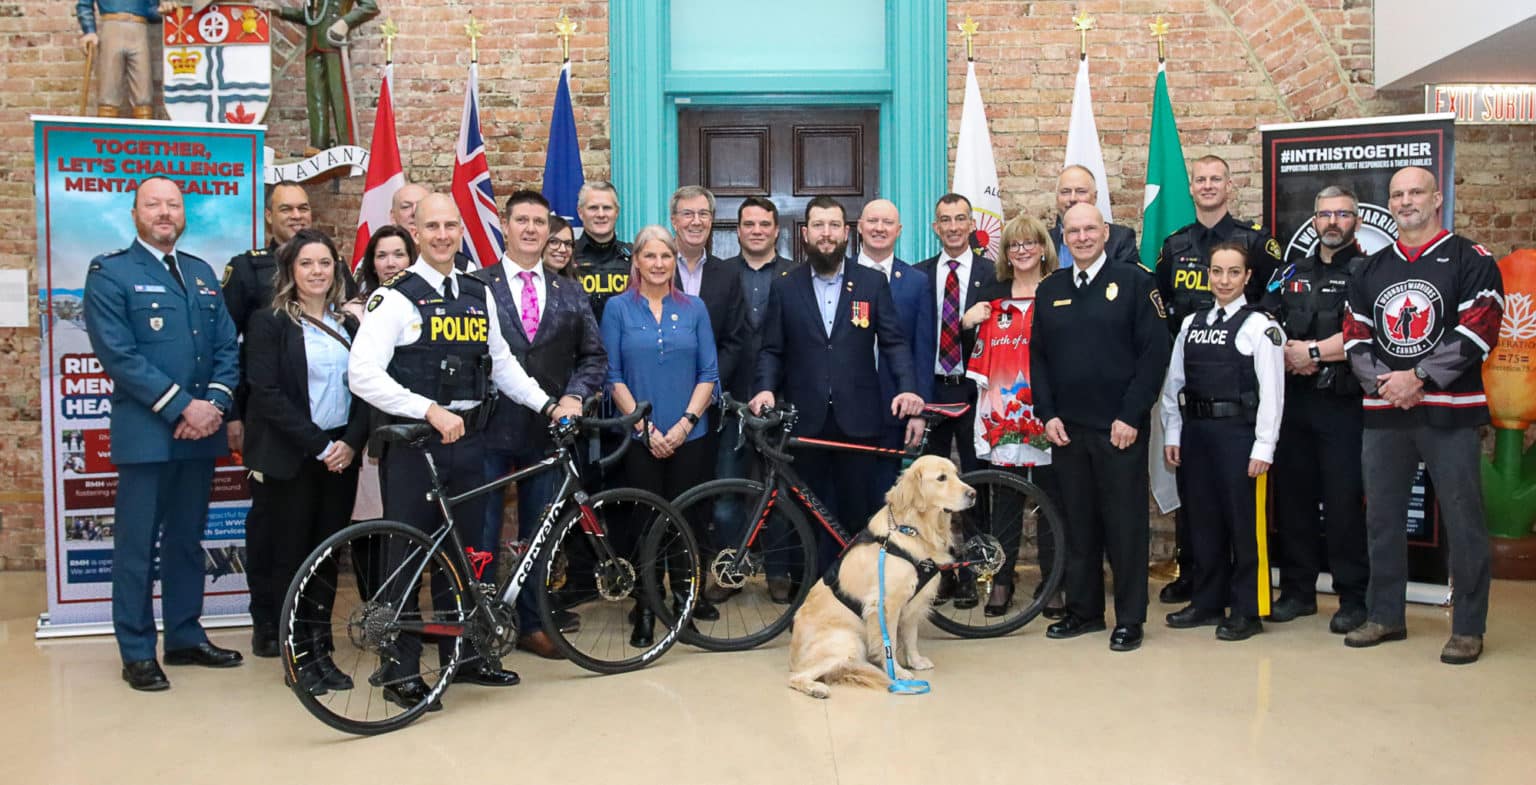 WOUNDED WARRIORS CANADA LAUNCHES RIDE FOR MENTAL HEALTH Wounded